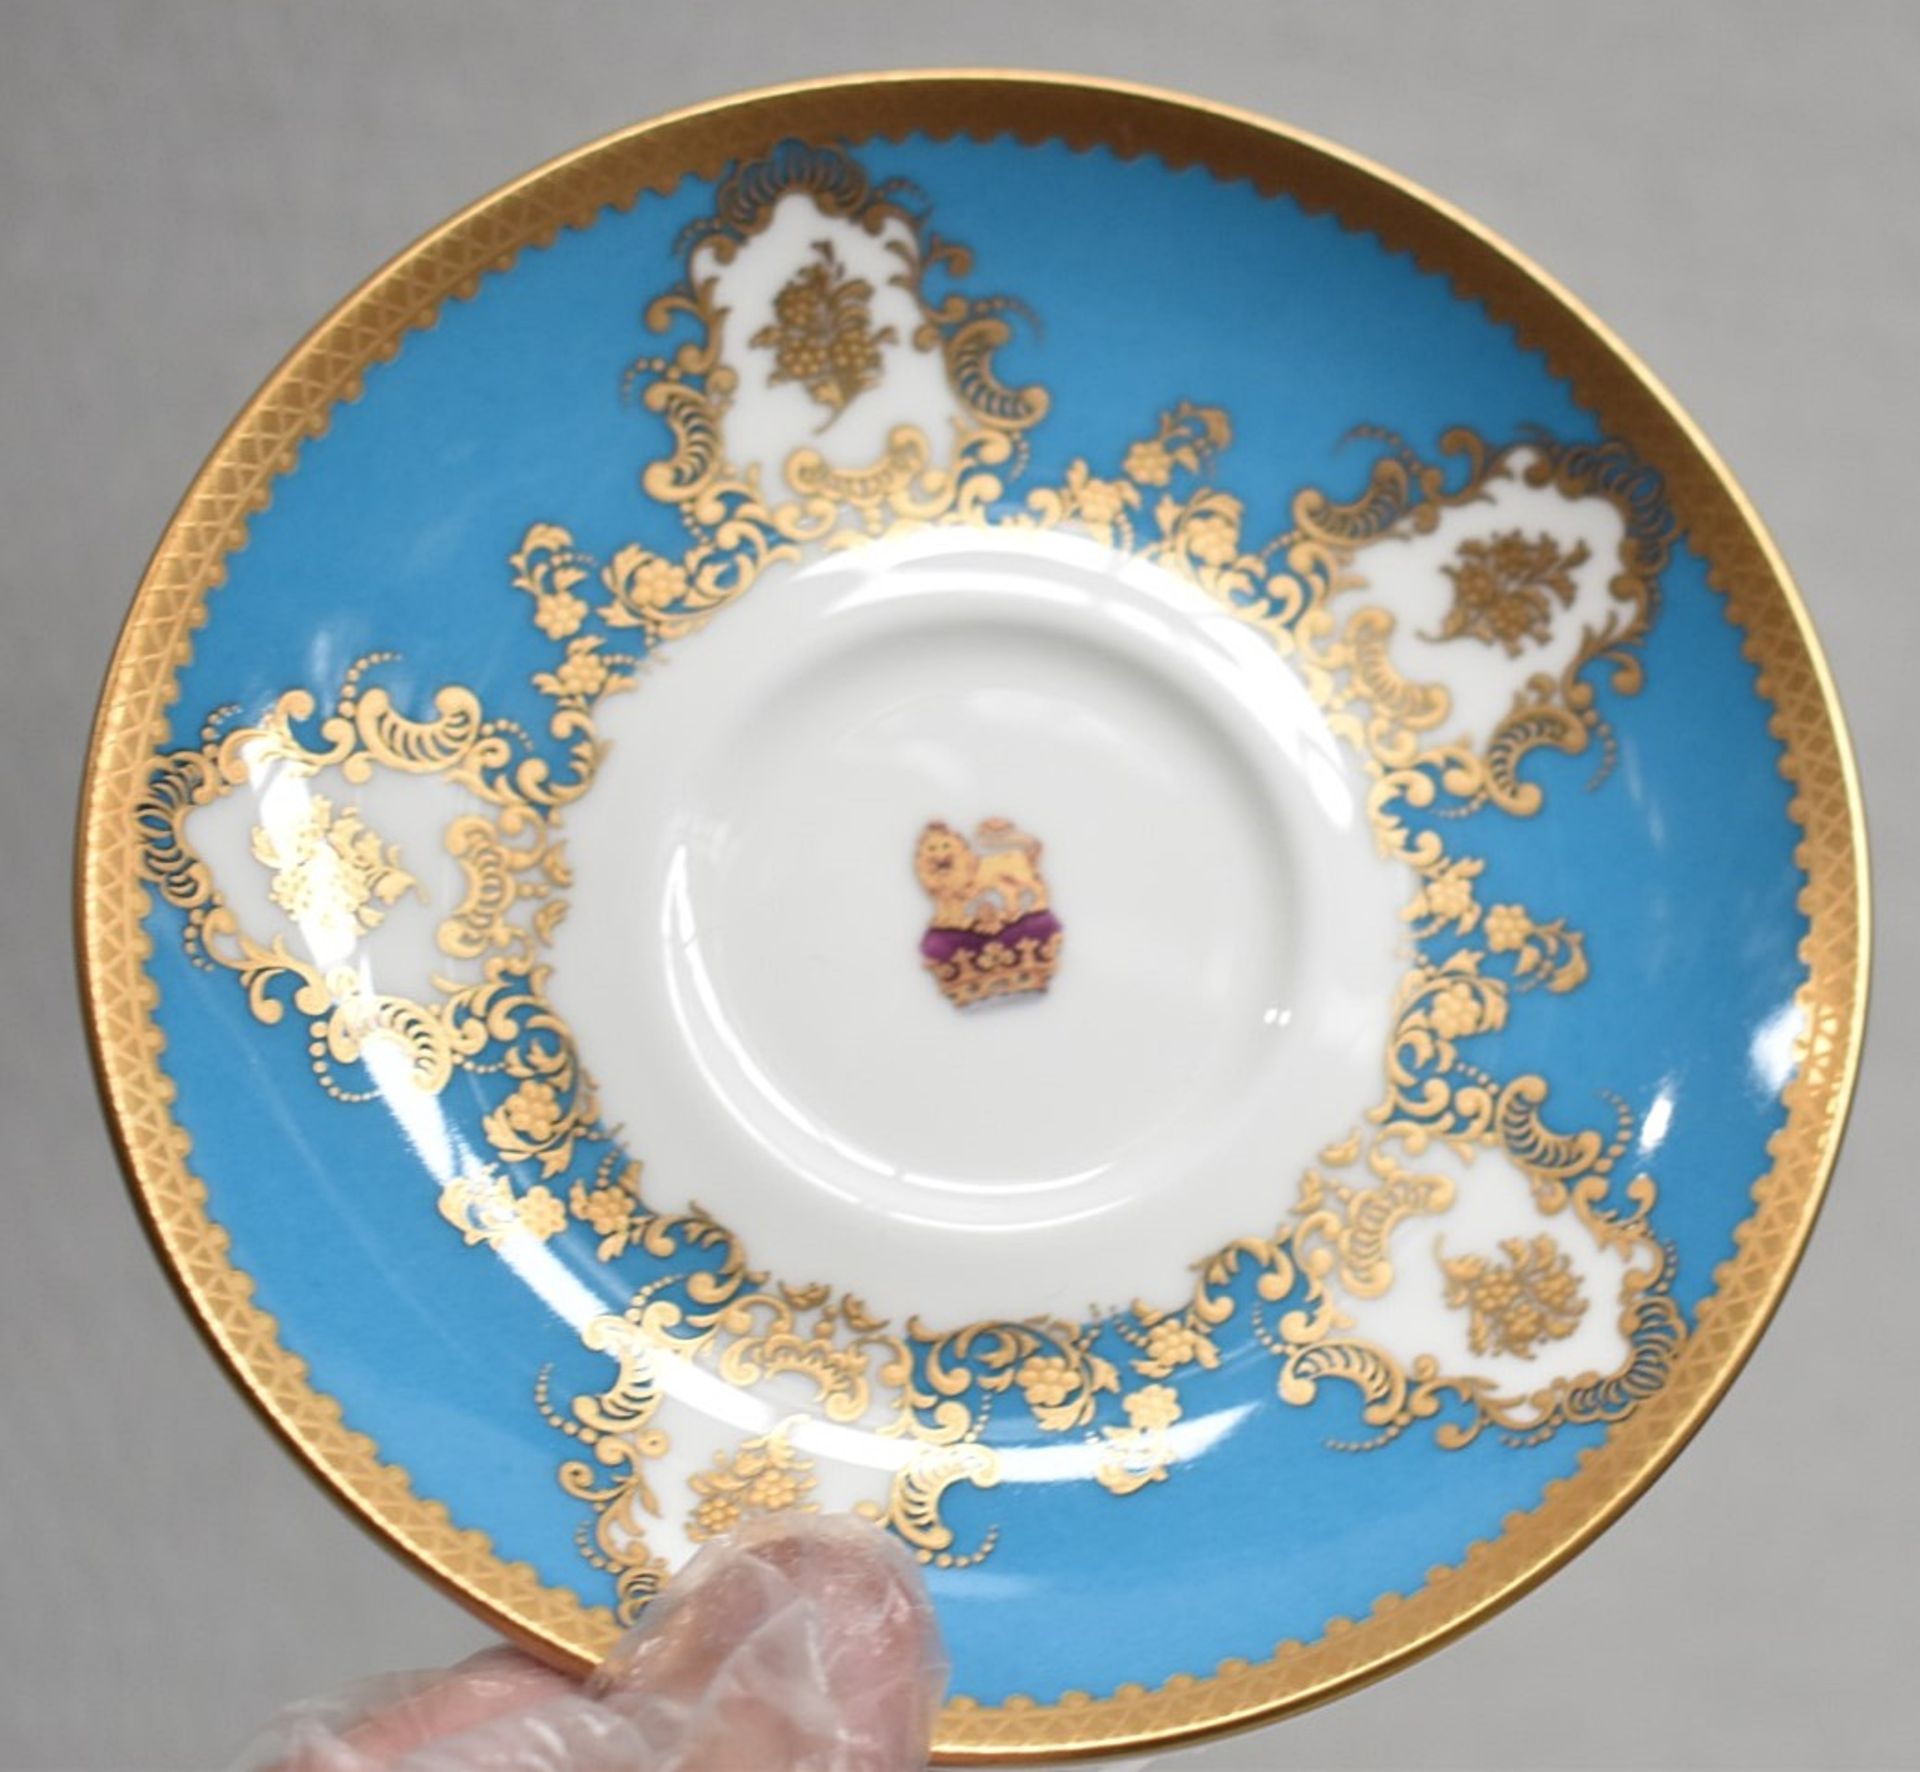 1 x ROYAL COLLECTION TRUST 'Coat of Arms' Fine Bone China Teacup and Saucer Set, Hand finished - Image 6 of 9